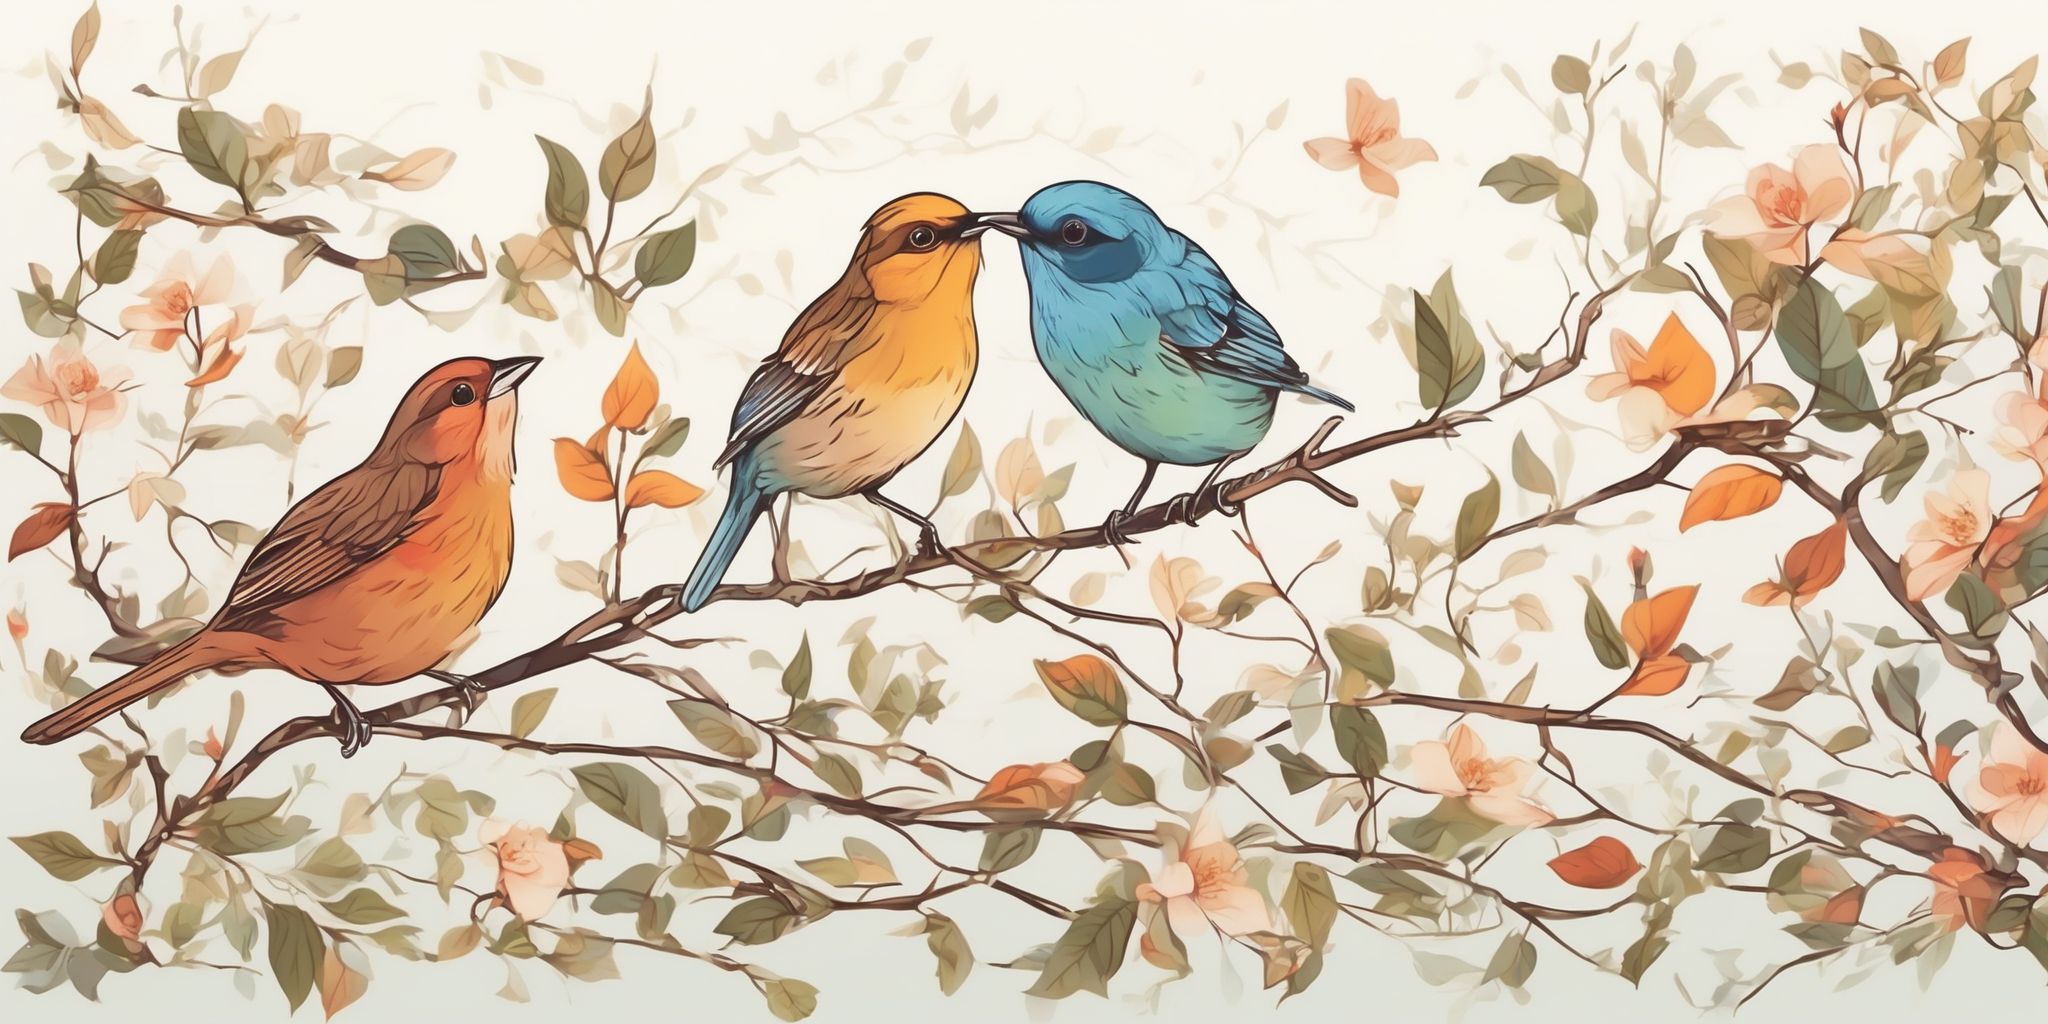 birdsong in illustration style with gradients and white background